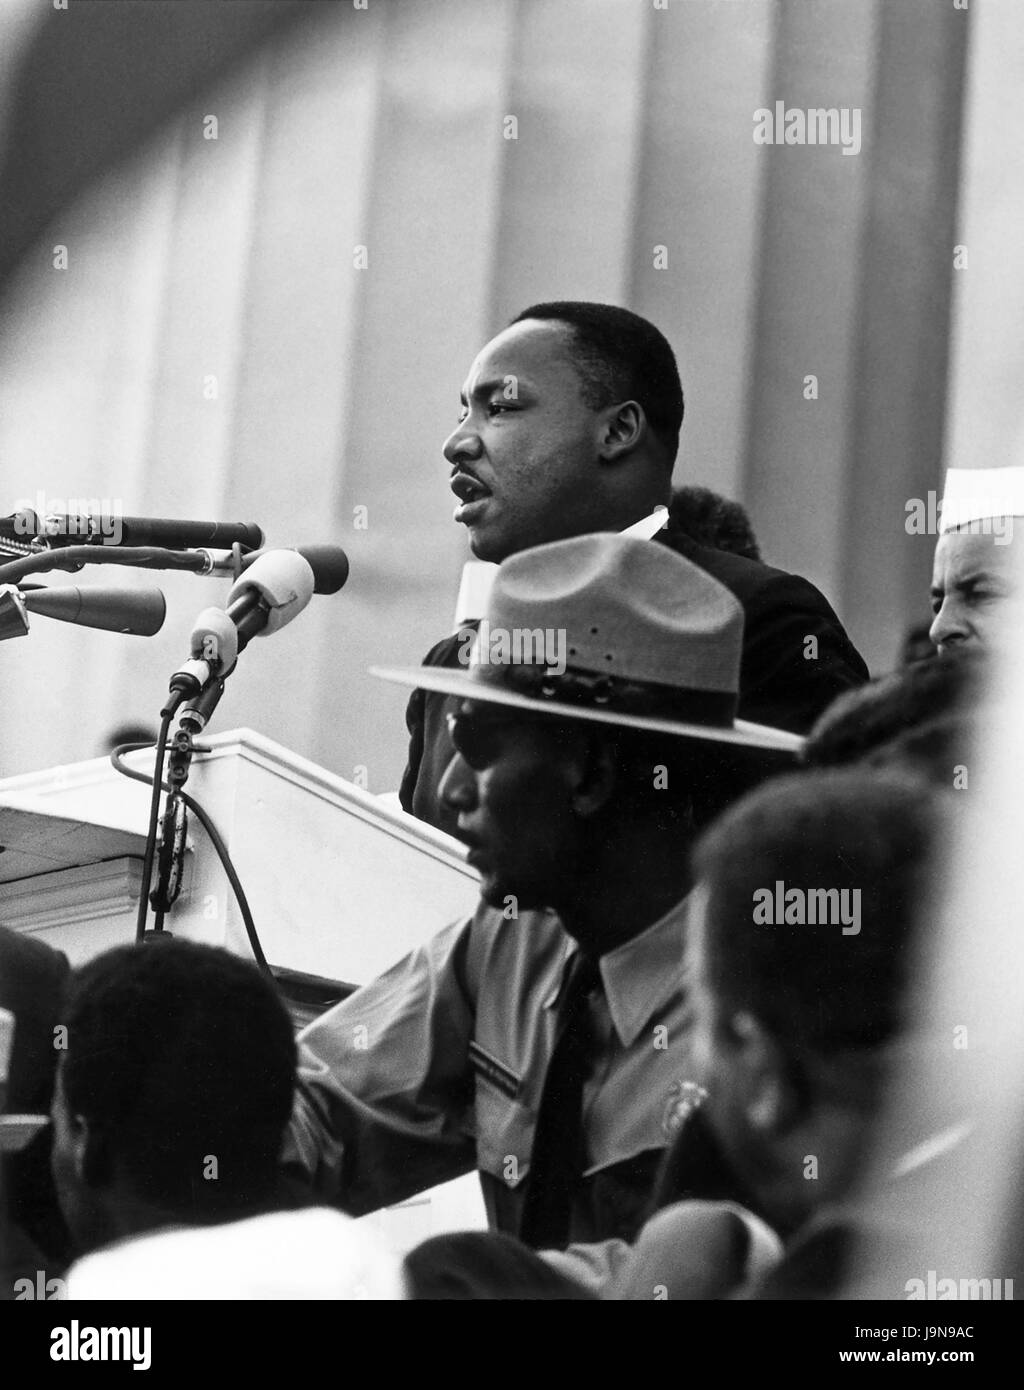 Dr. Martin Luther King, Jr. speaking in front of the Lincoln Memorial on August 28, 1963 at the civil rights March on Washington, D.C. where he delivered his historic 'I Have a Dream' speech. (Photo by Rowland Scherman) Stock Photo